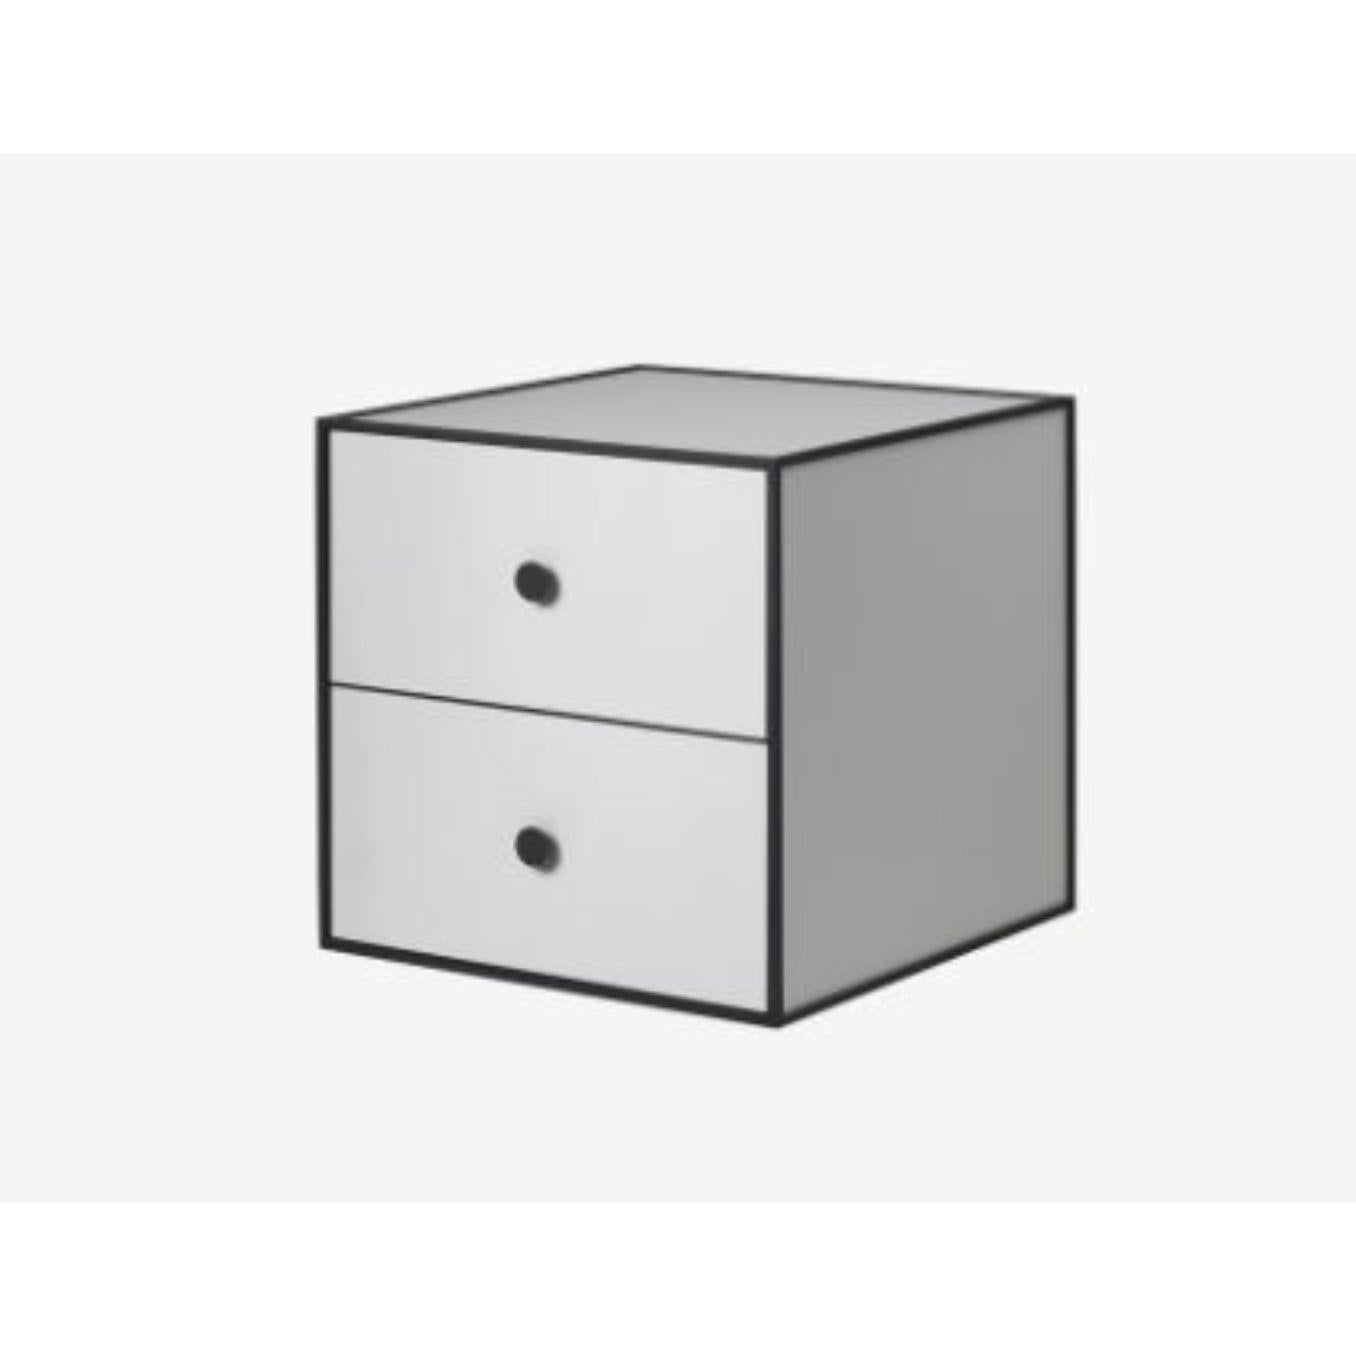 35 Dark grey frame box with 2 drawer by Lassen
Dimensions: W 35 x D 35 x H 35 cm 
Materials: Finér, Melamin, Melamin, Melamine, Metal, Veneer,
Also available in different colors and dimensions. 
Weight: 10.50, 10.50, 11.50, 11.50 Kg

Frame